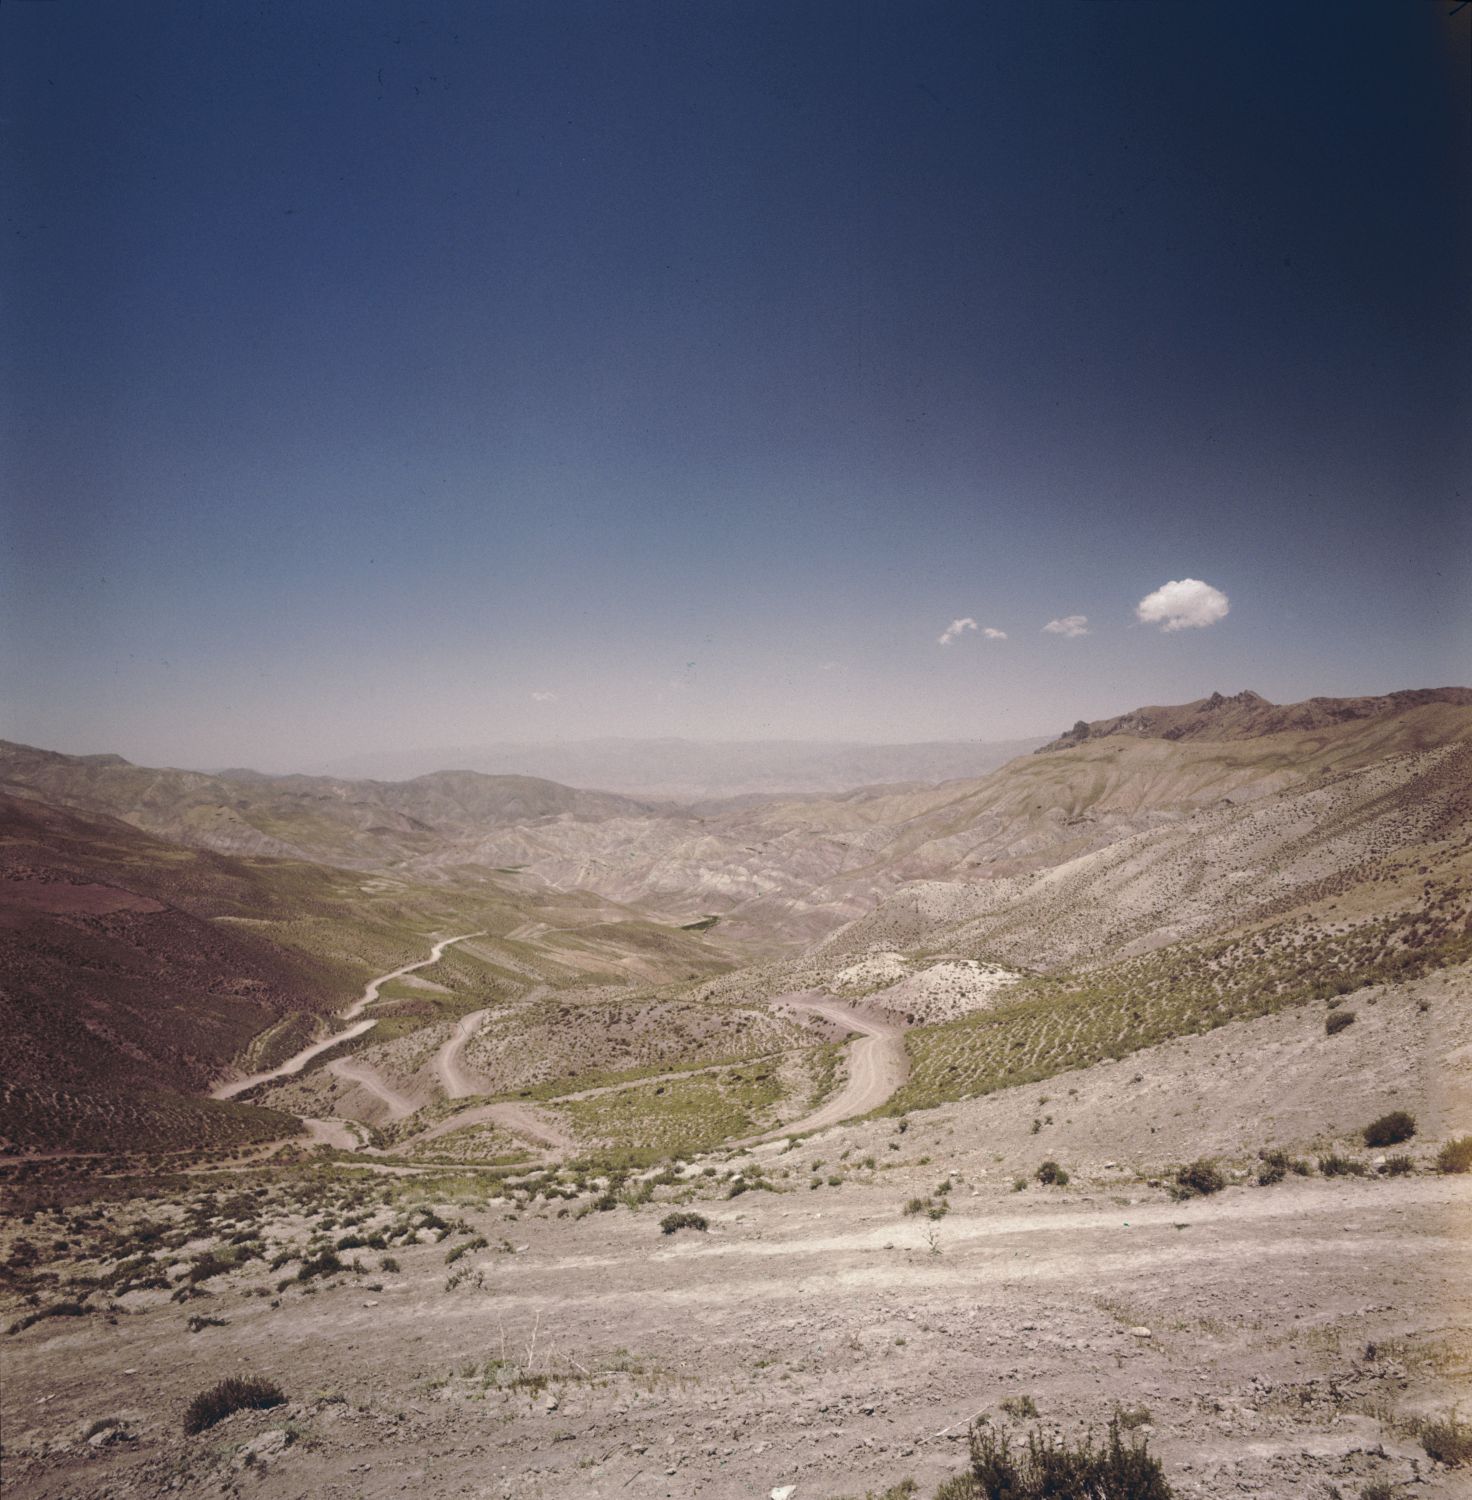 View into a valley in the vicinity of Jam, Afghanistan.